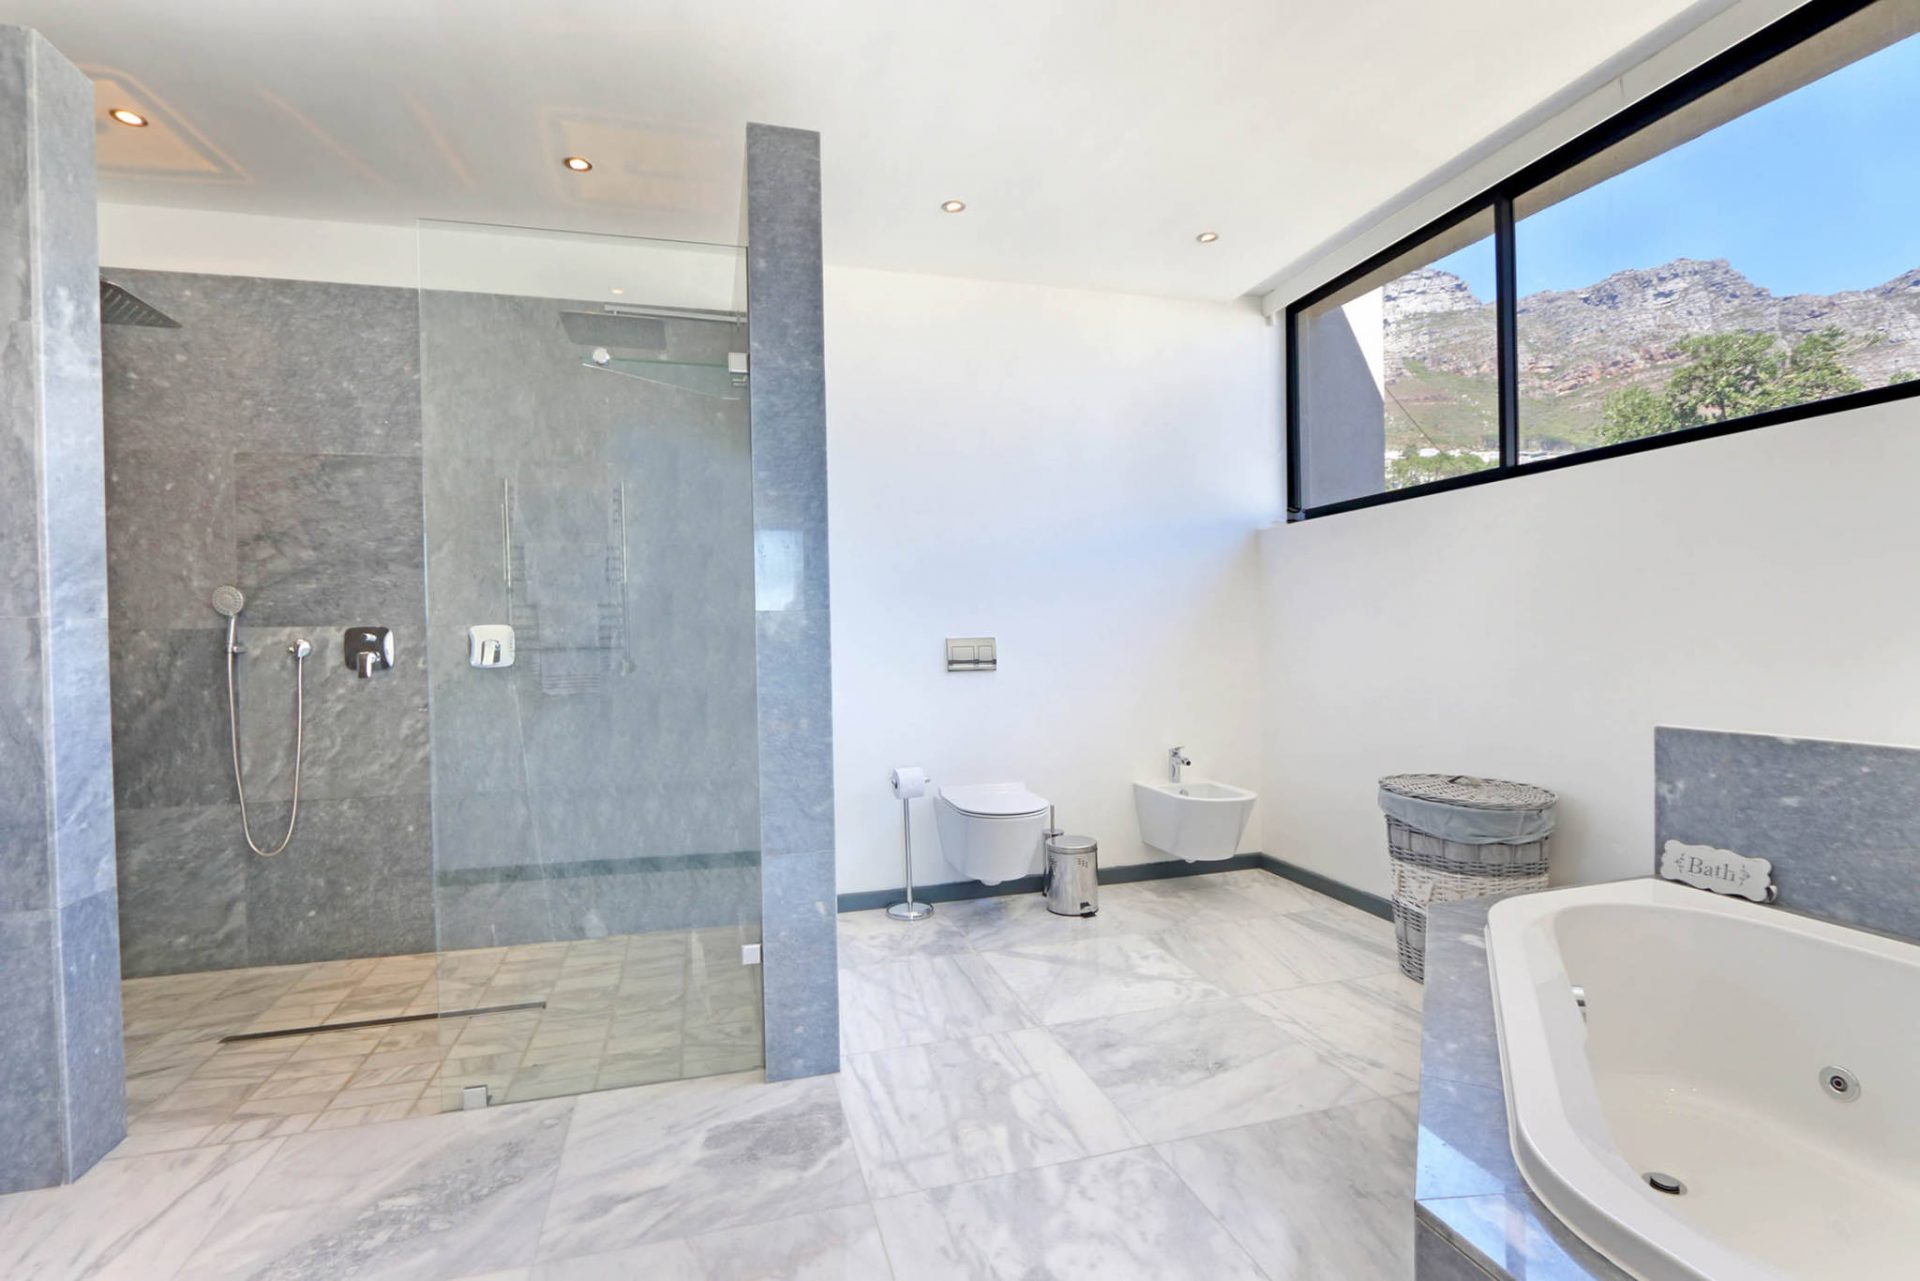 Photo 15 of 20 Finchley Villa accommodation in Camps Bay, Cape Town with 6 bedrooms and 5 bathrooms